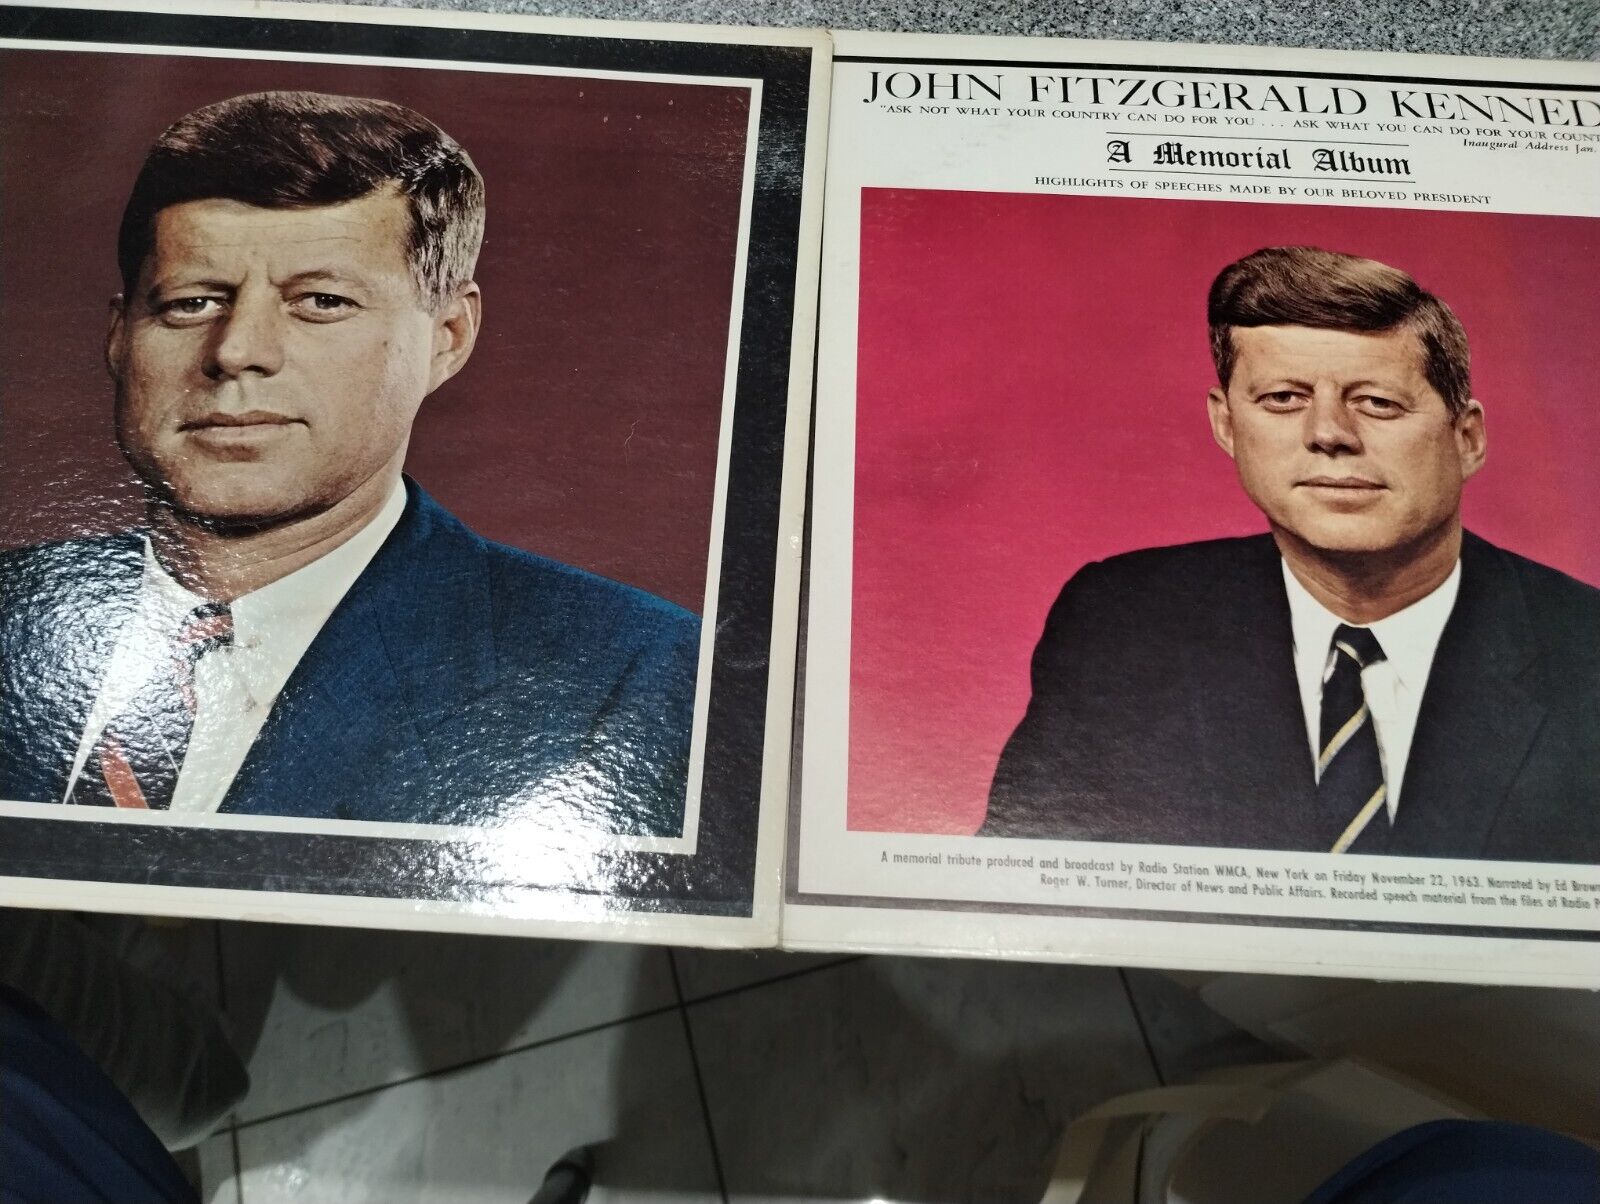 John F. Kennedy collectible vinyl records both albums highlights of speeches